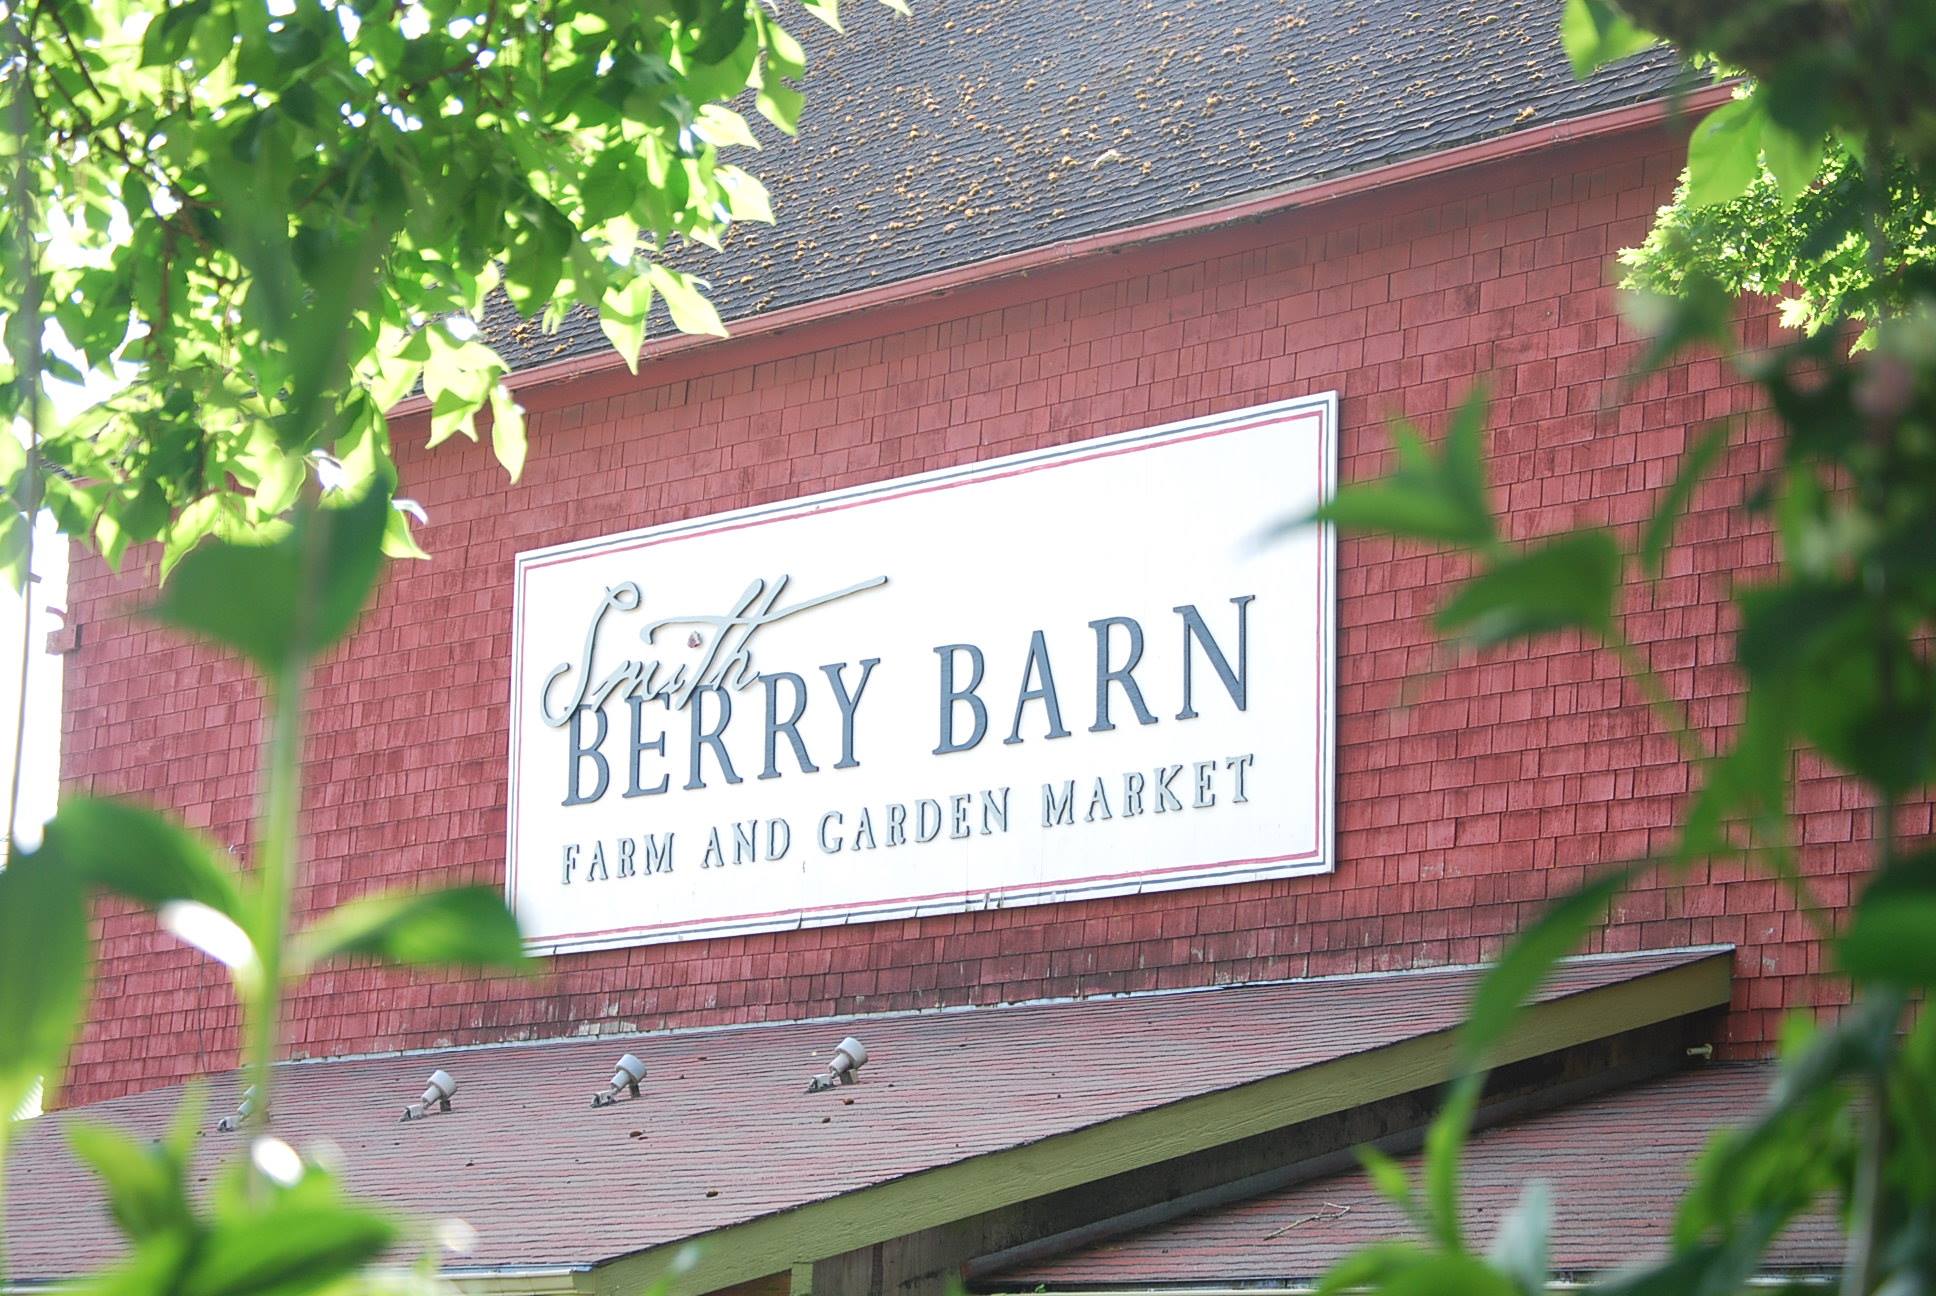 Business logo of Smith Berry Barn